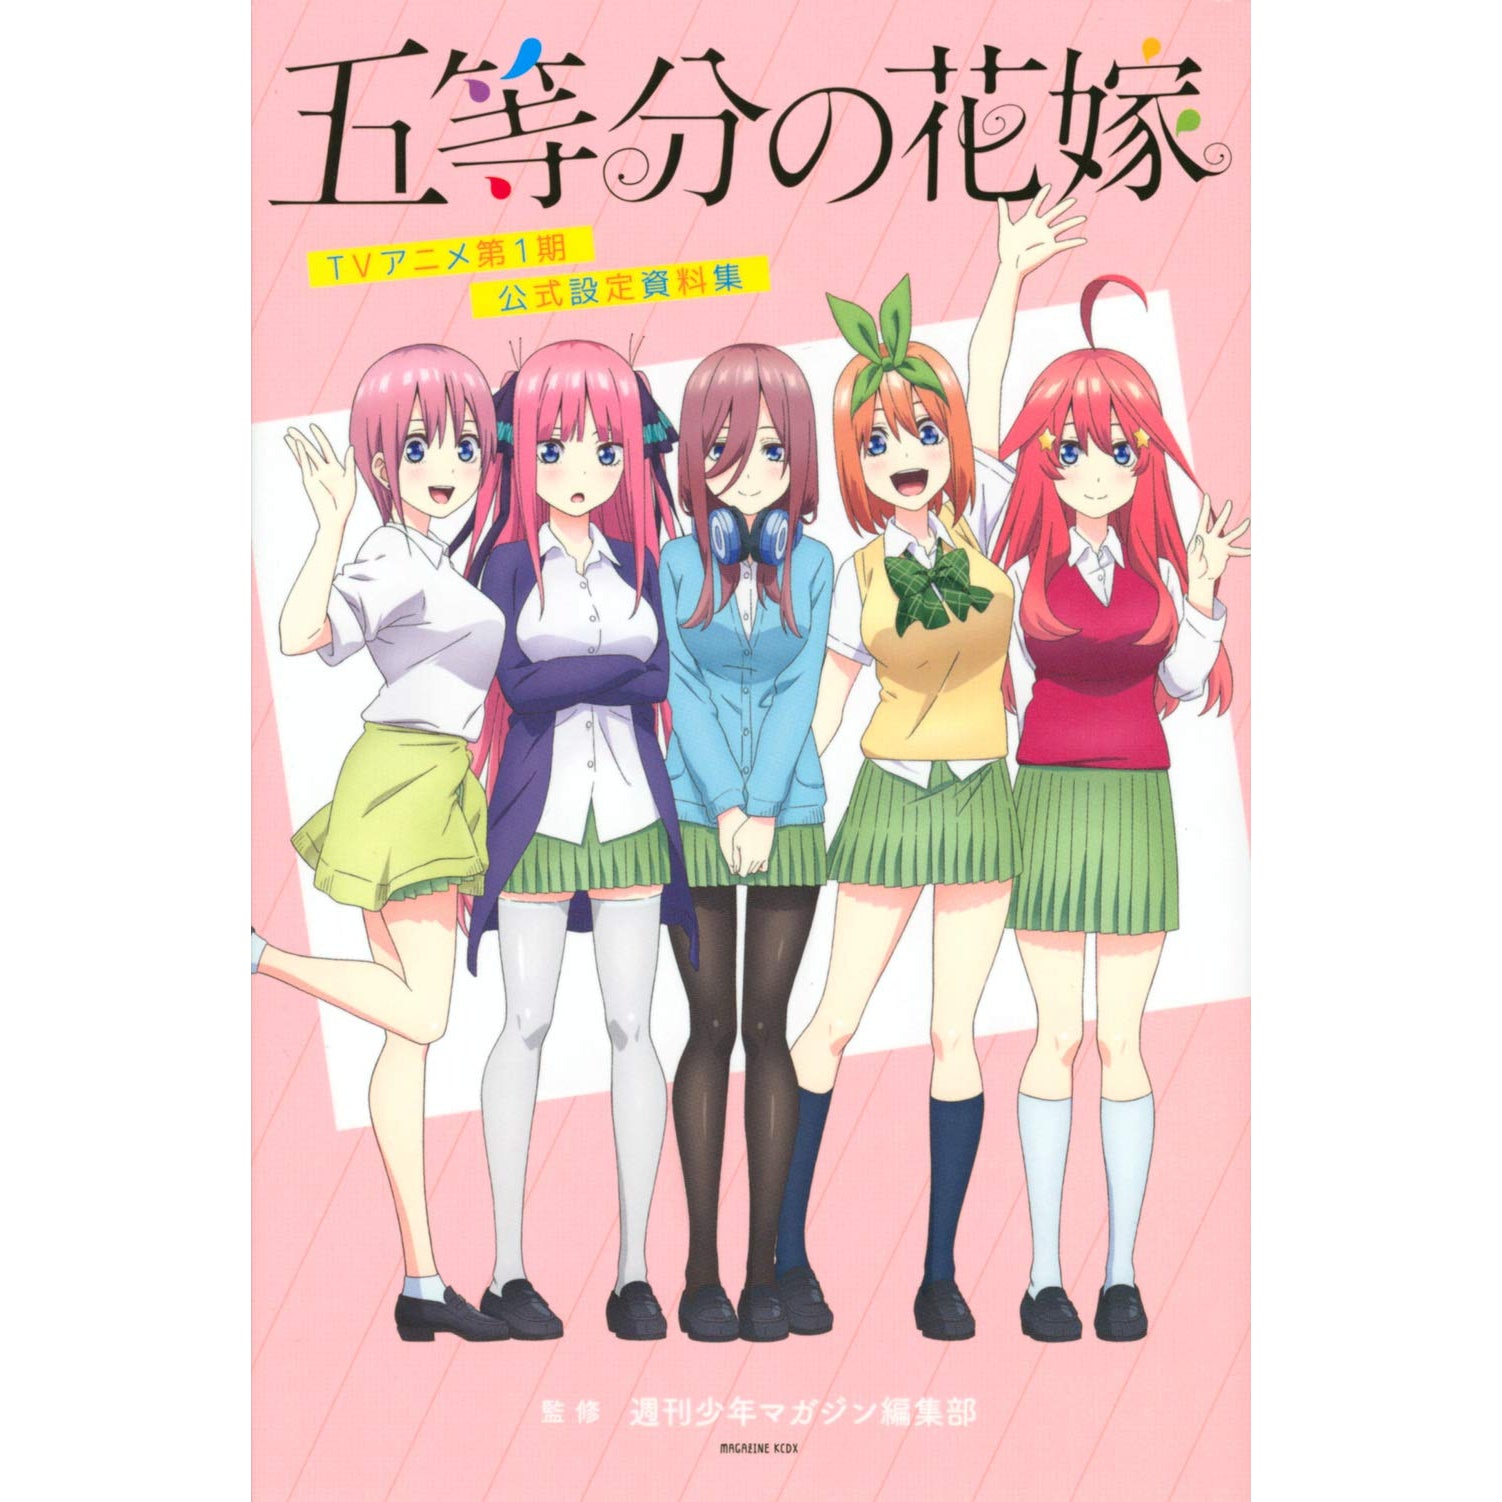 New The Quintessential Quintuplets~ Anime Is A TV Special That